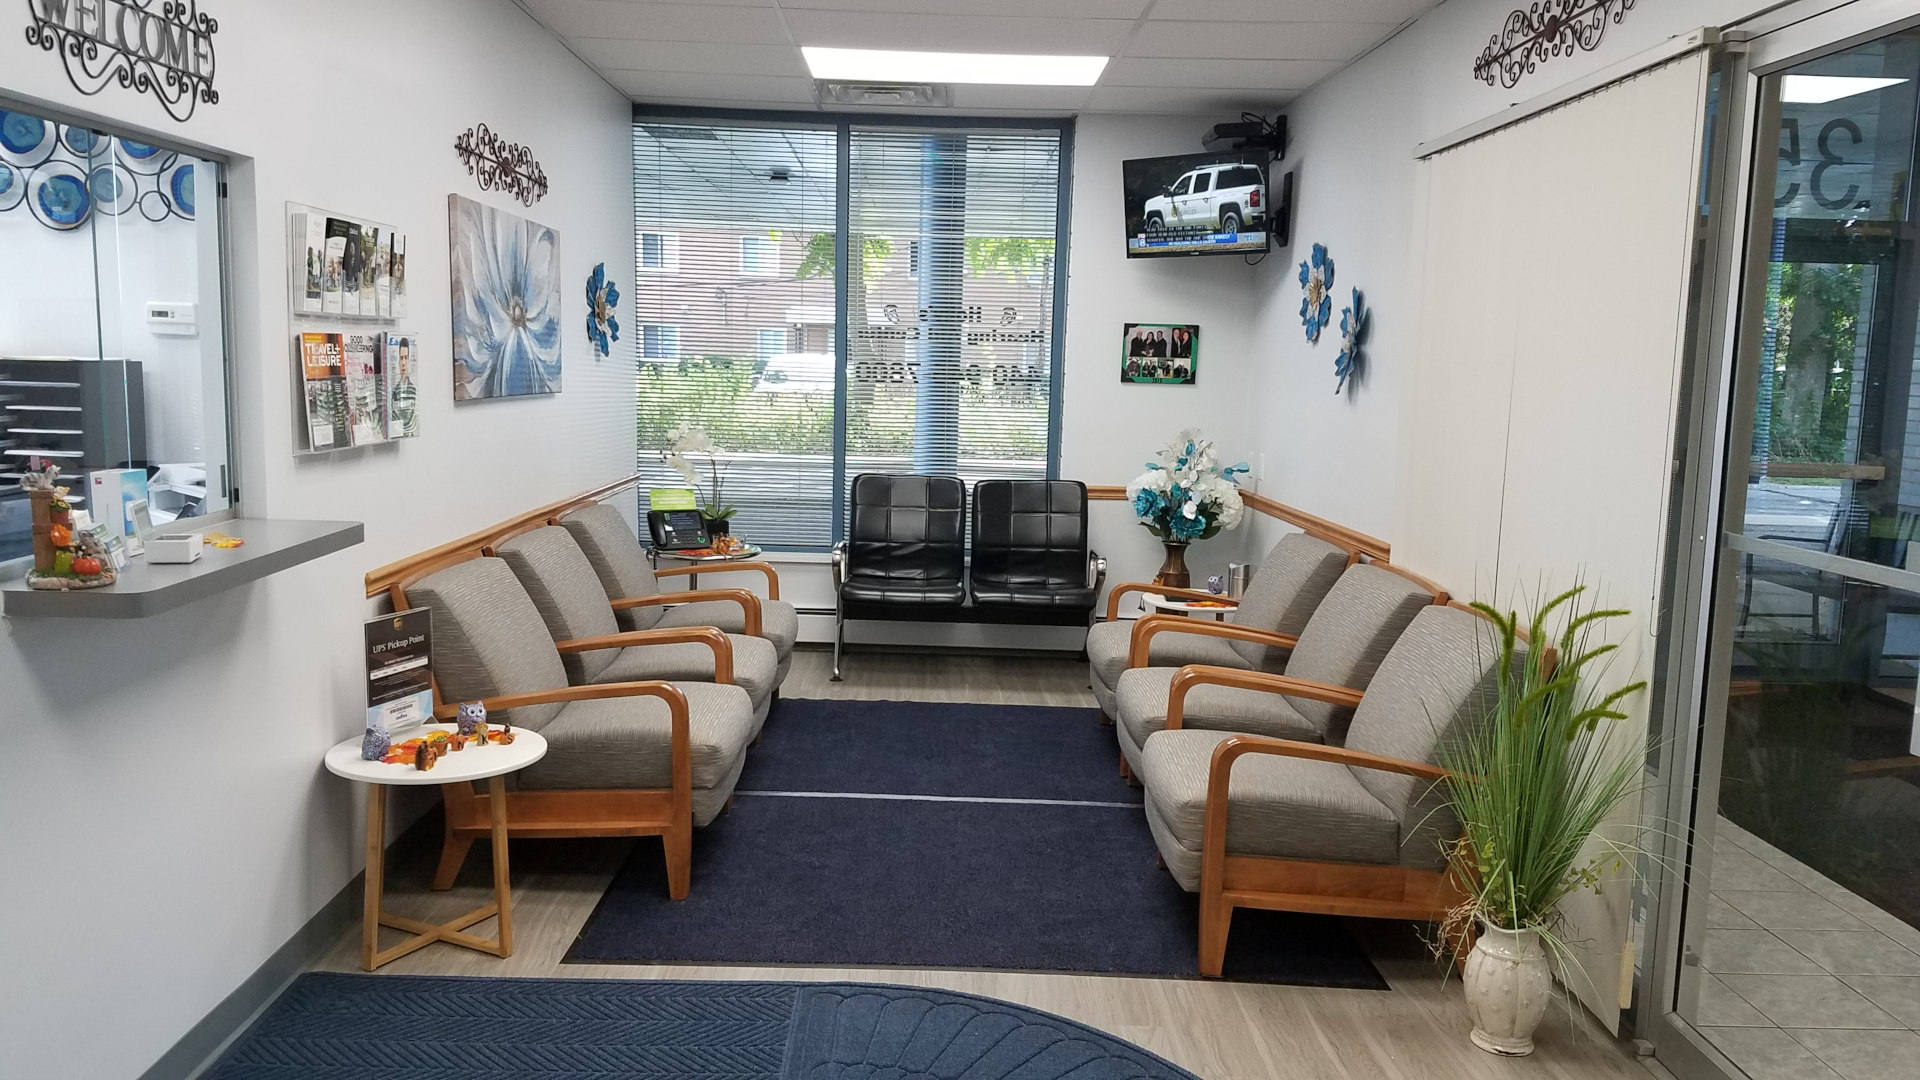 front lobby waiting area with chairs lining the walls and tv mounted near ceiling on back wall